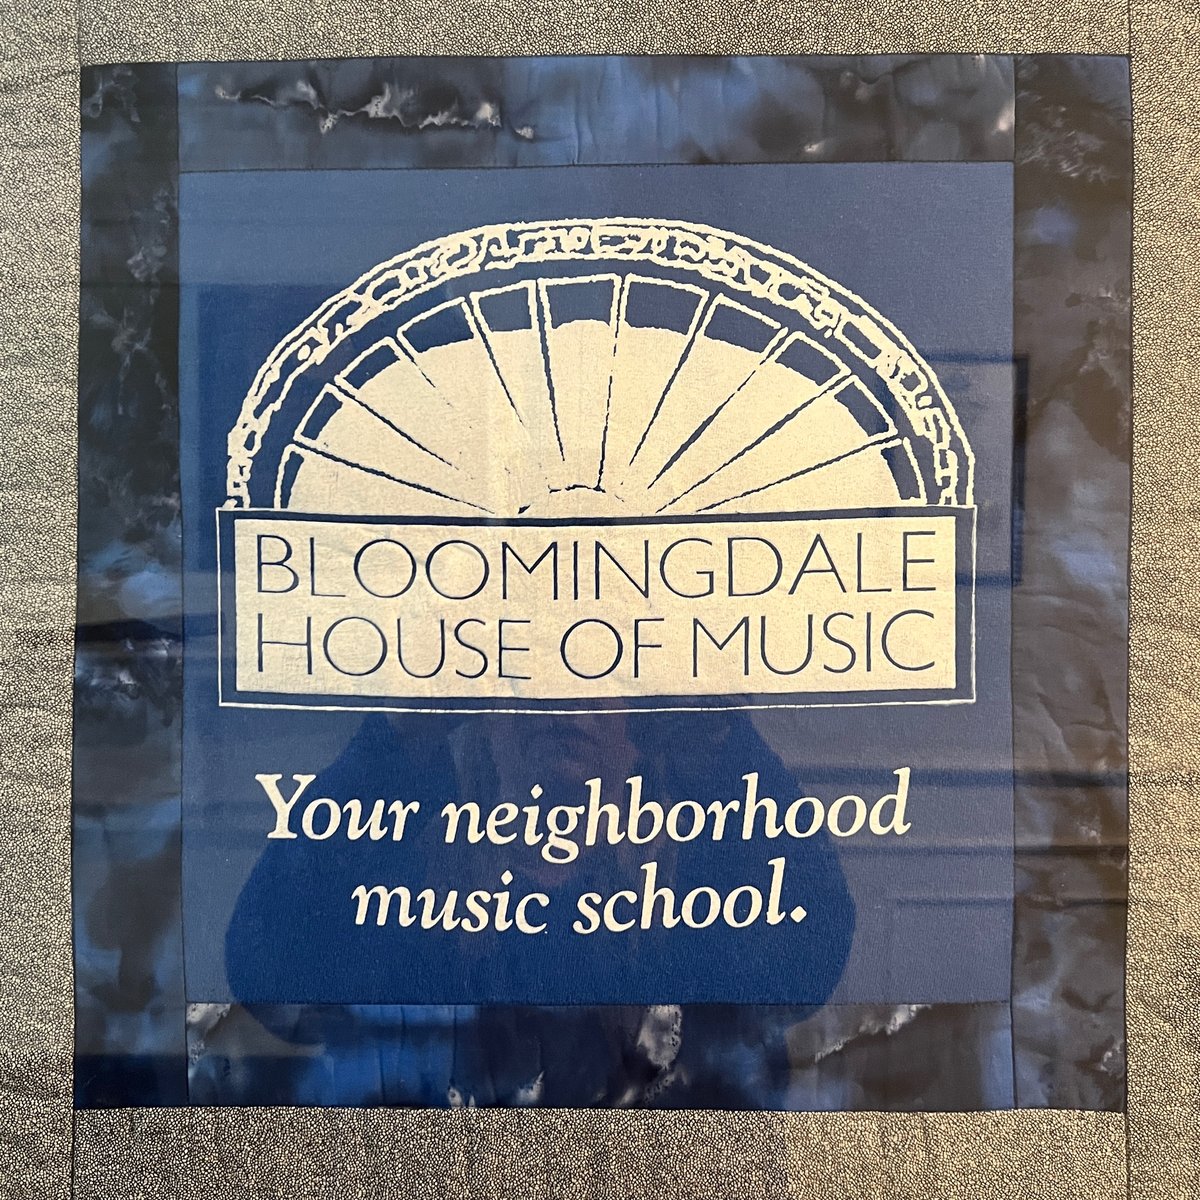 Check out our brand new quilt at Bloomingdale School of Music! 😍

#BloomingdaleSchoolOfMusic #QuiltArt #BSMHistory #MusicEducation